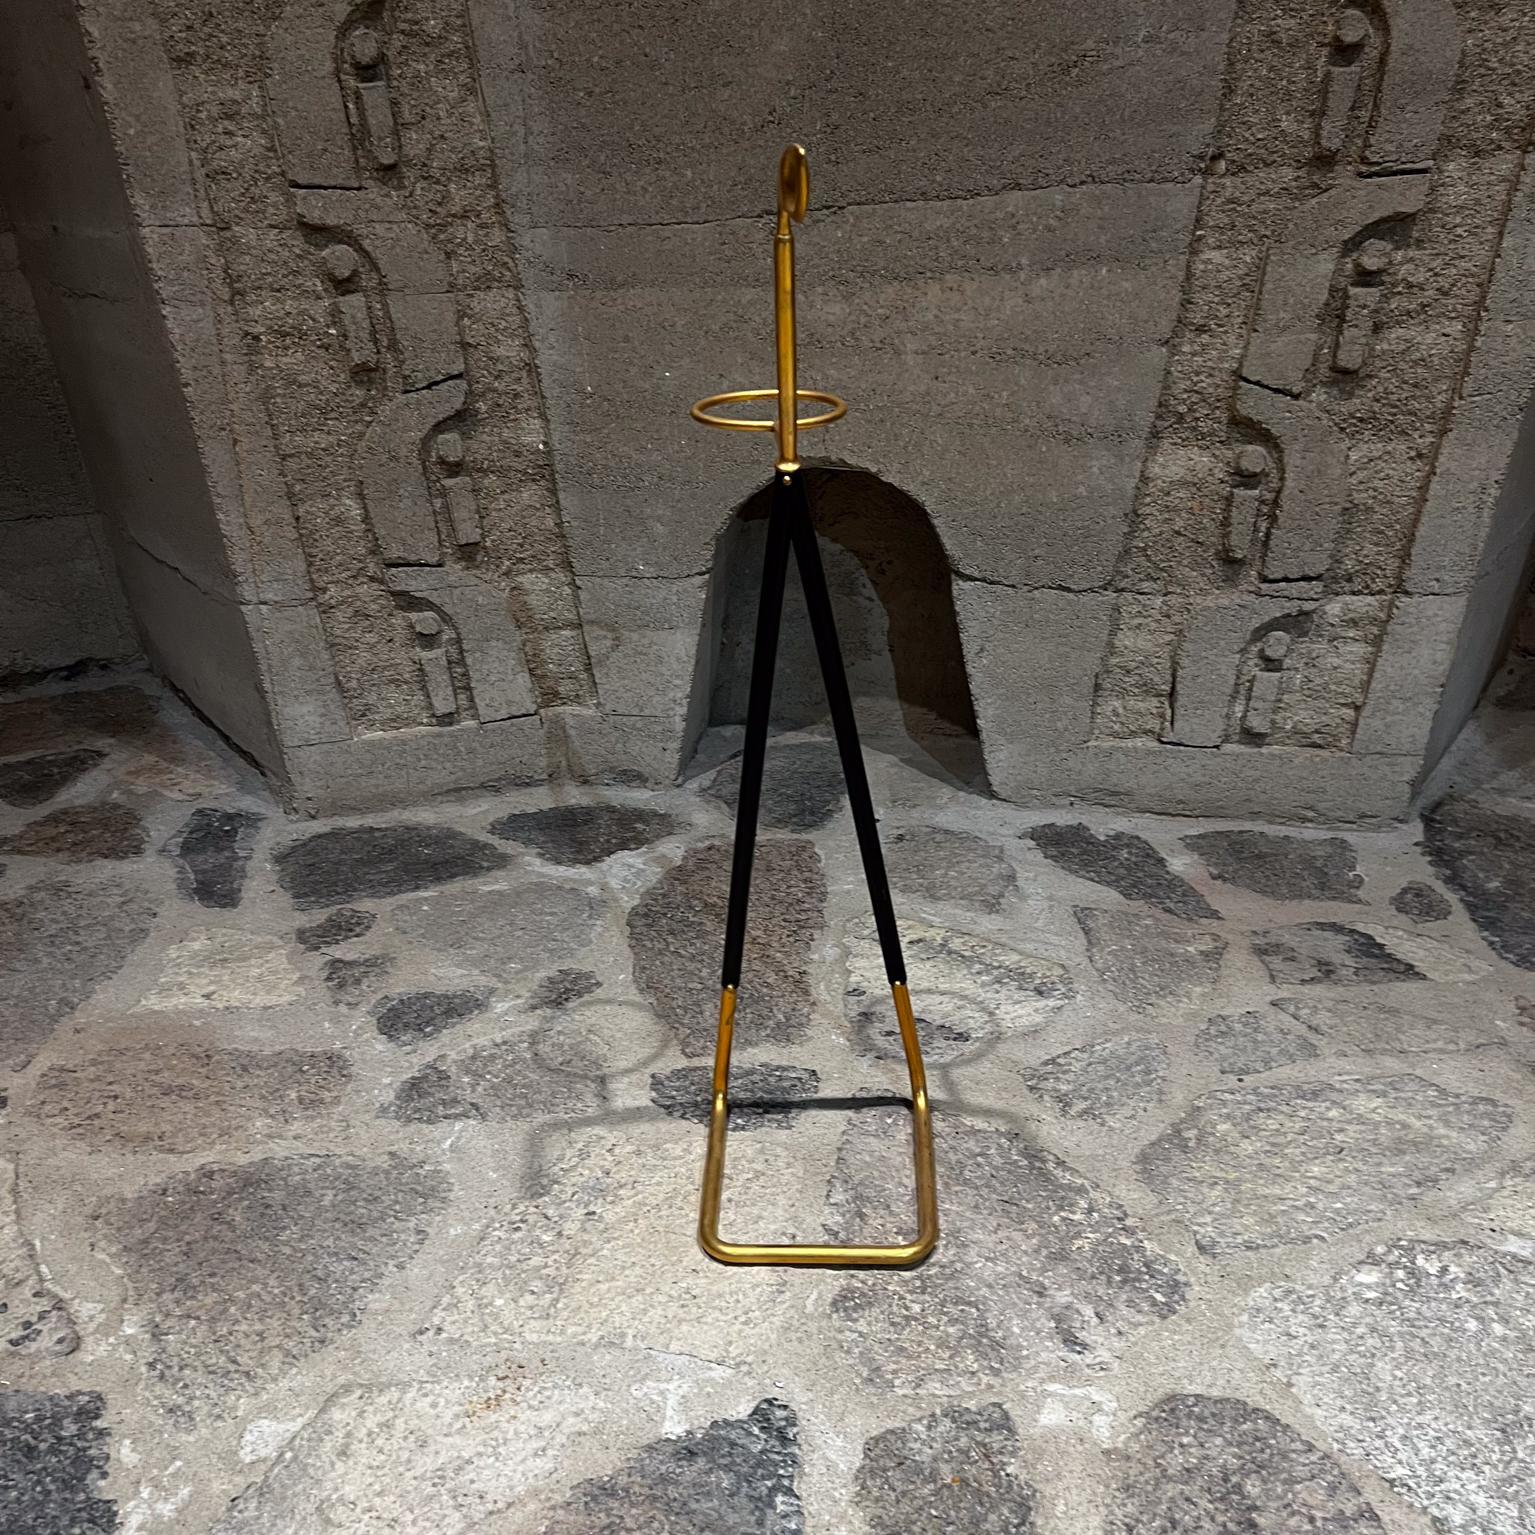 Fabulous Umbrella Stand made in ITALY 1950s
Sculpturally crafted in polished brass and black metal.
Style of Cesare Lacca & Ico Parisi
Original unrestored like new vintage condition.
 28 h x 7.25 d x 6.5 w
Refer to images.